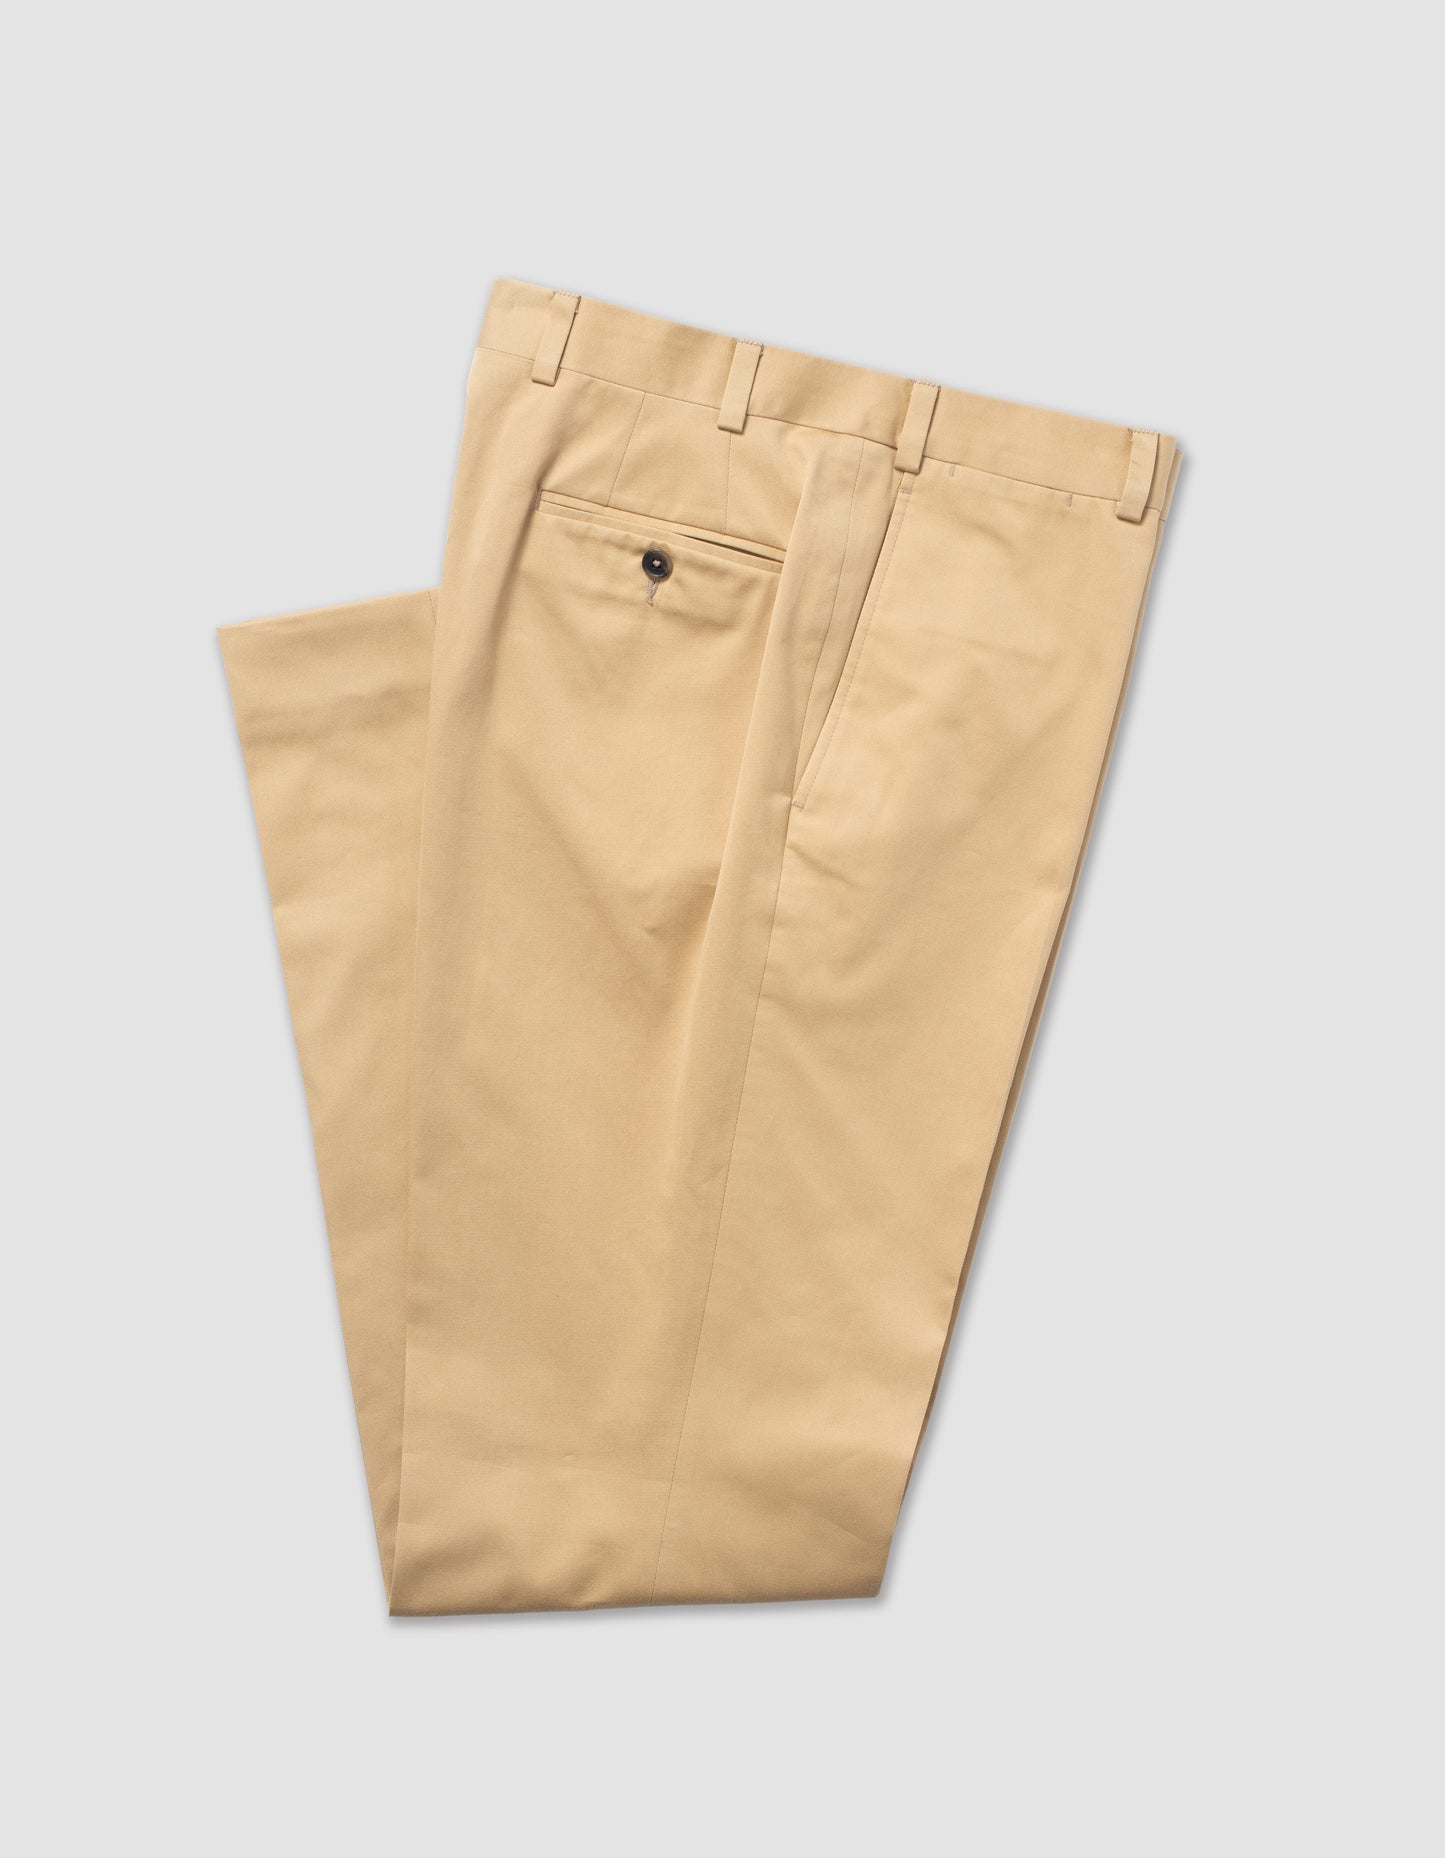 GOLD COTTON DRILL CLOTH TROUSER - CLASSIC FIT